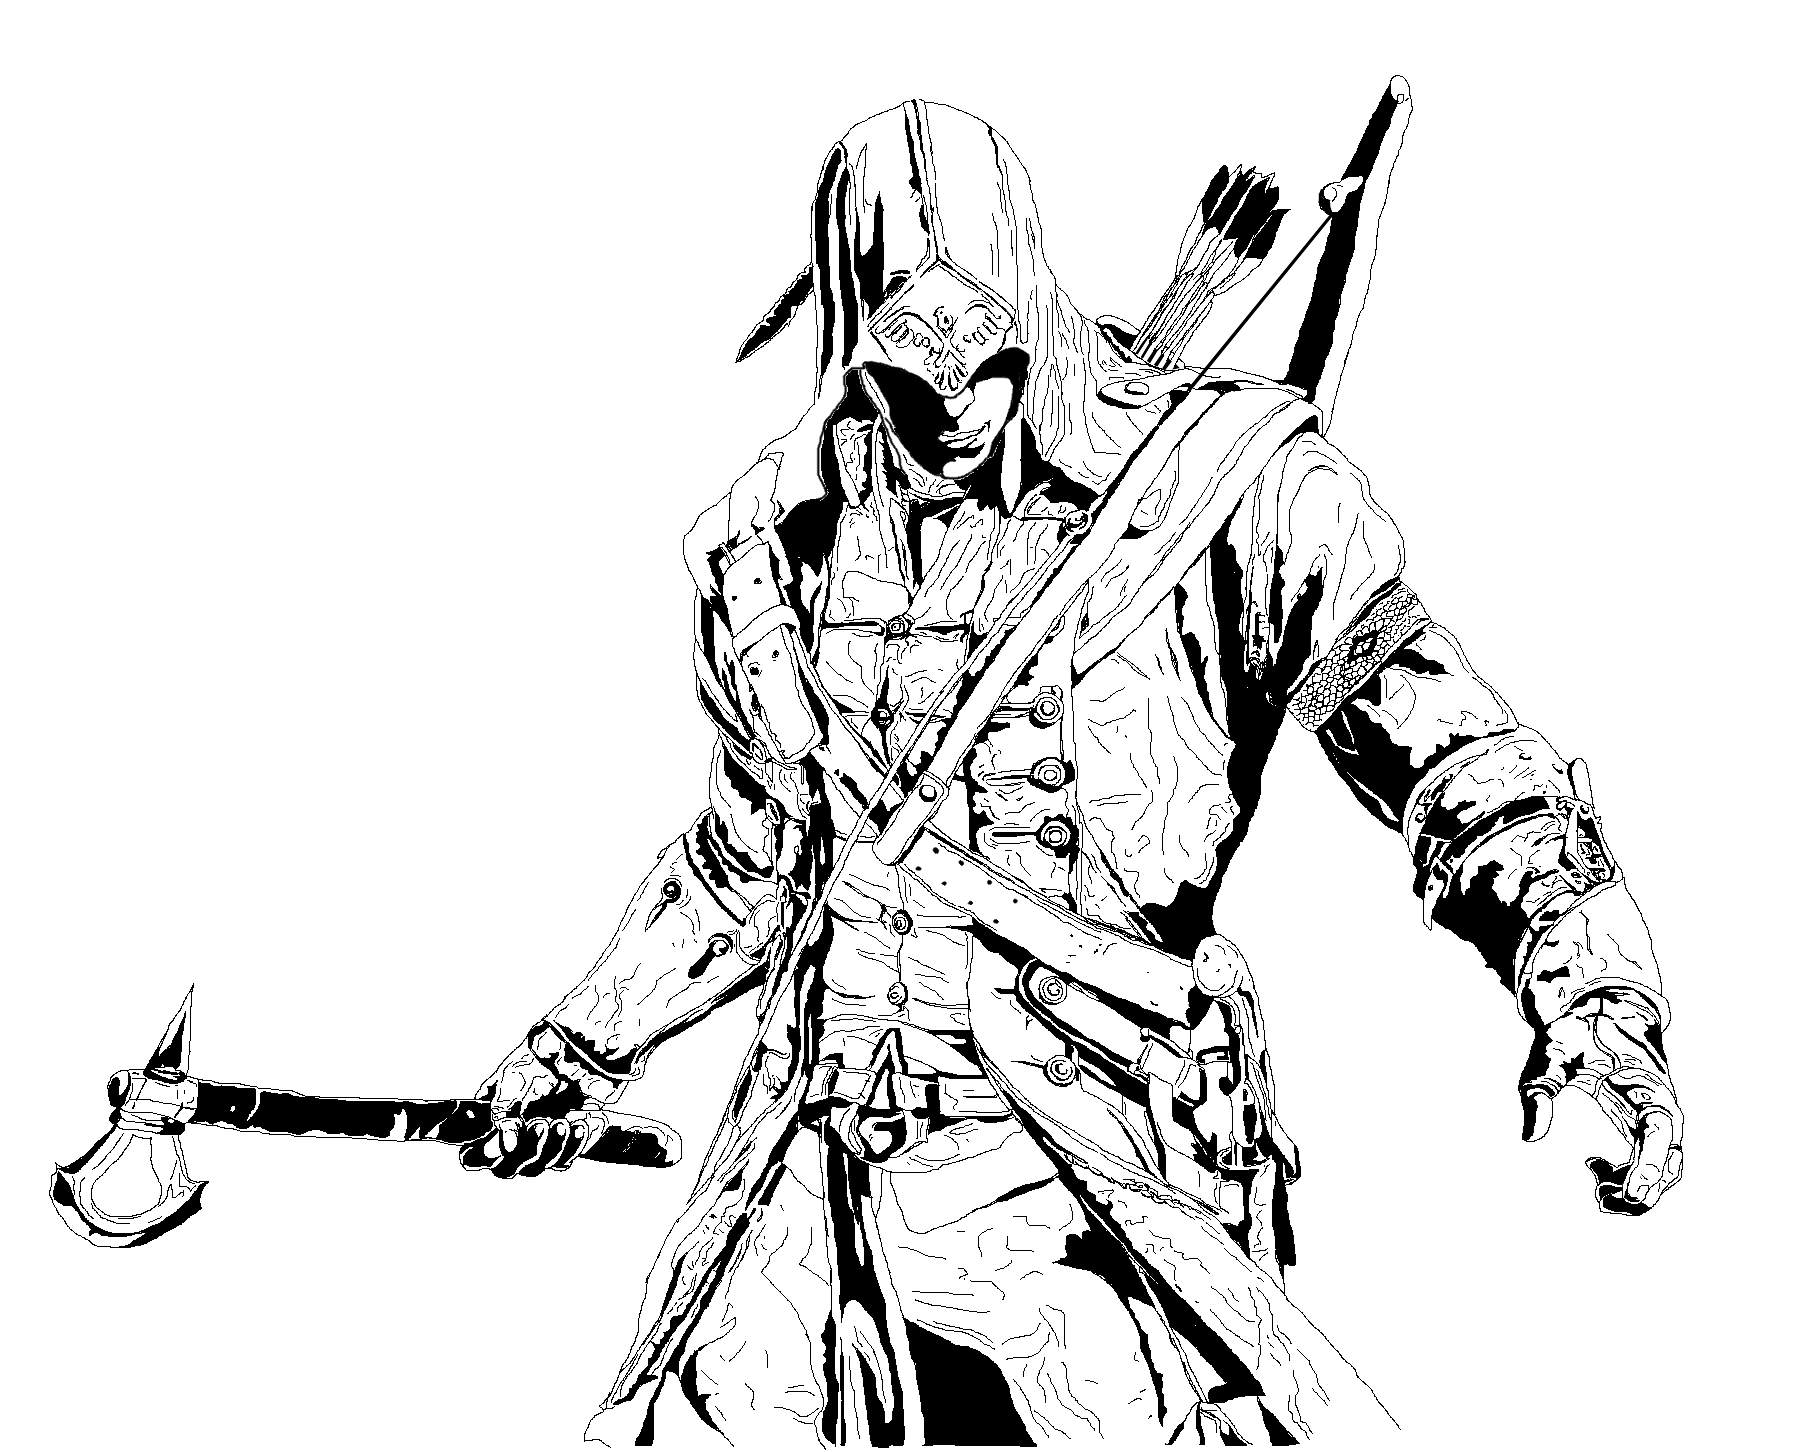 Assassin's Creed Coloring Pages Pdf to Print - Assassins Creed Coloring Pages connor kenway